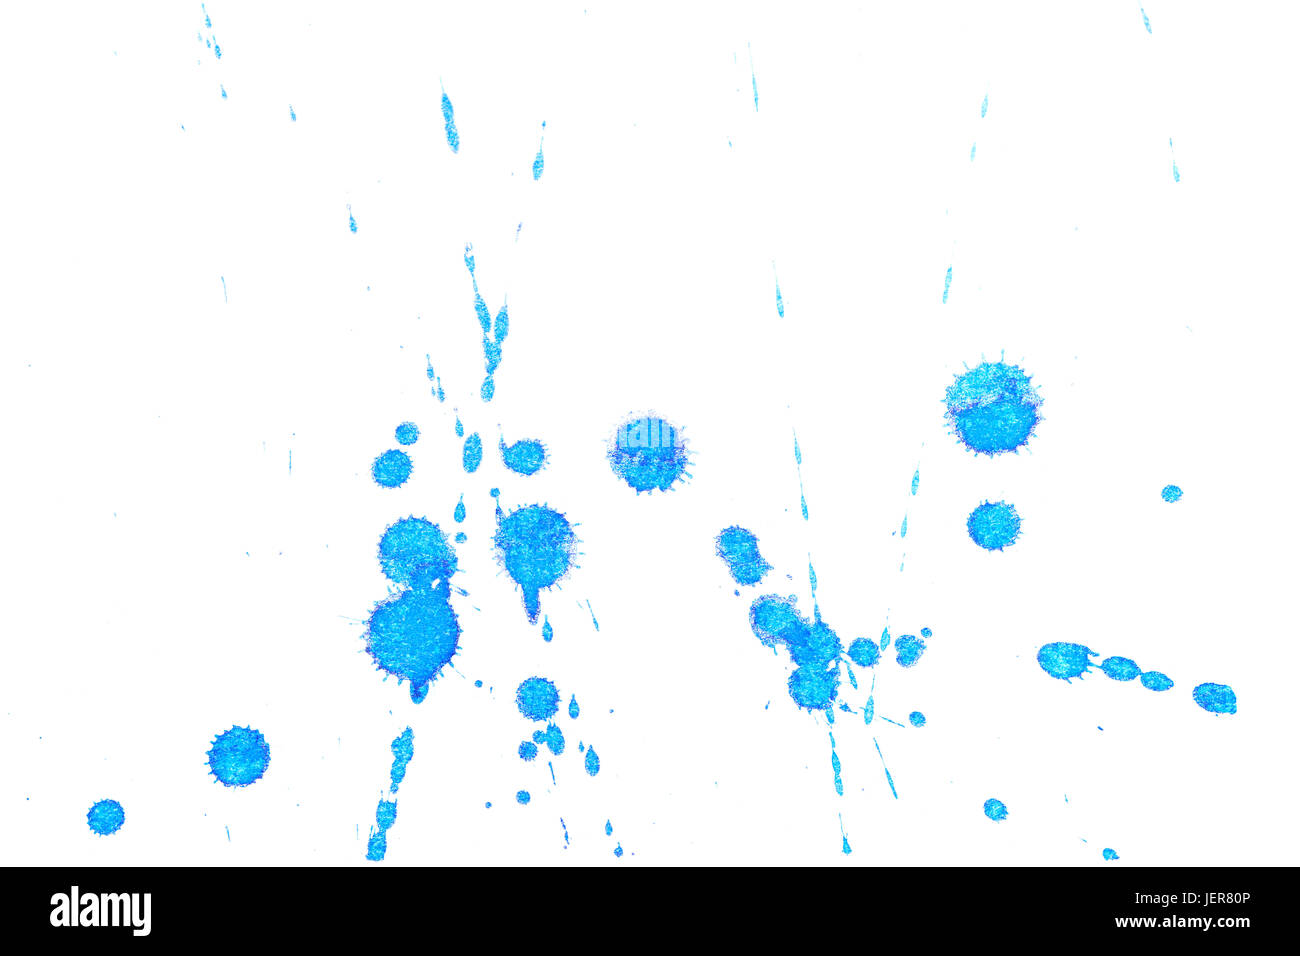 Abstract blue ink splash. Ink blots. Elements of design. Water-soluble mascara on a white sheet of paper. Abstract contemporary art. Stock Photo